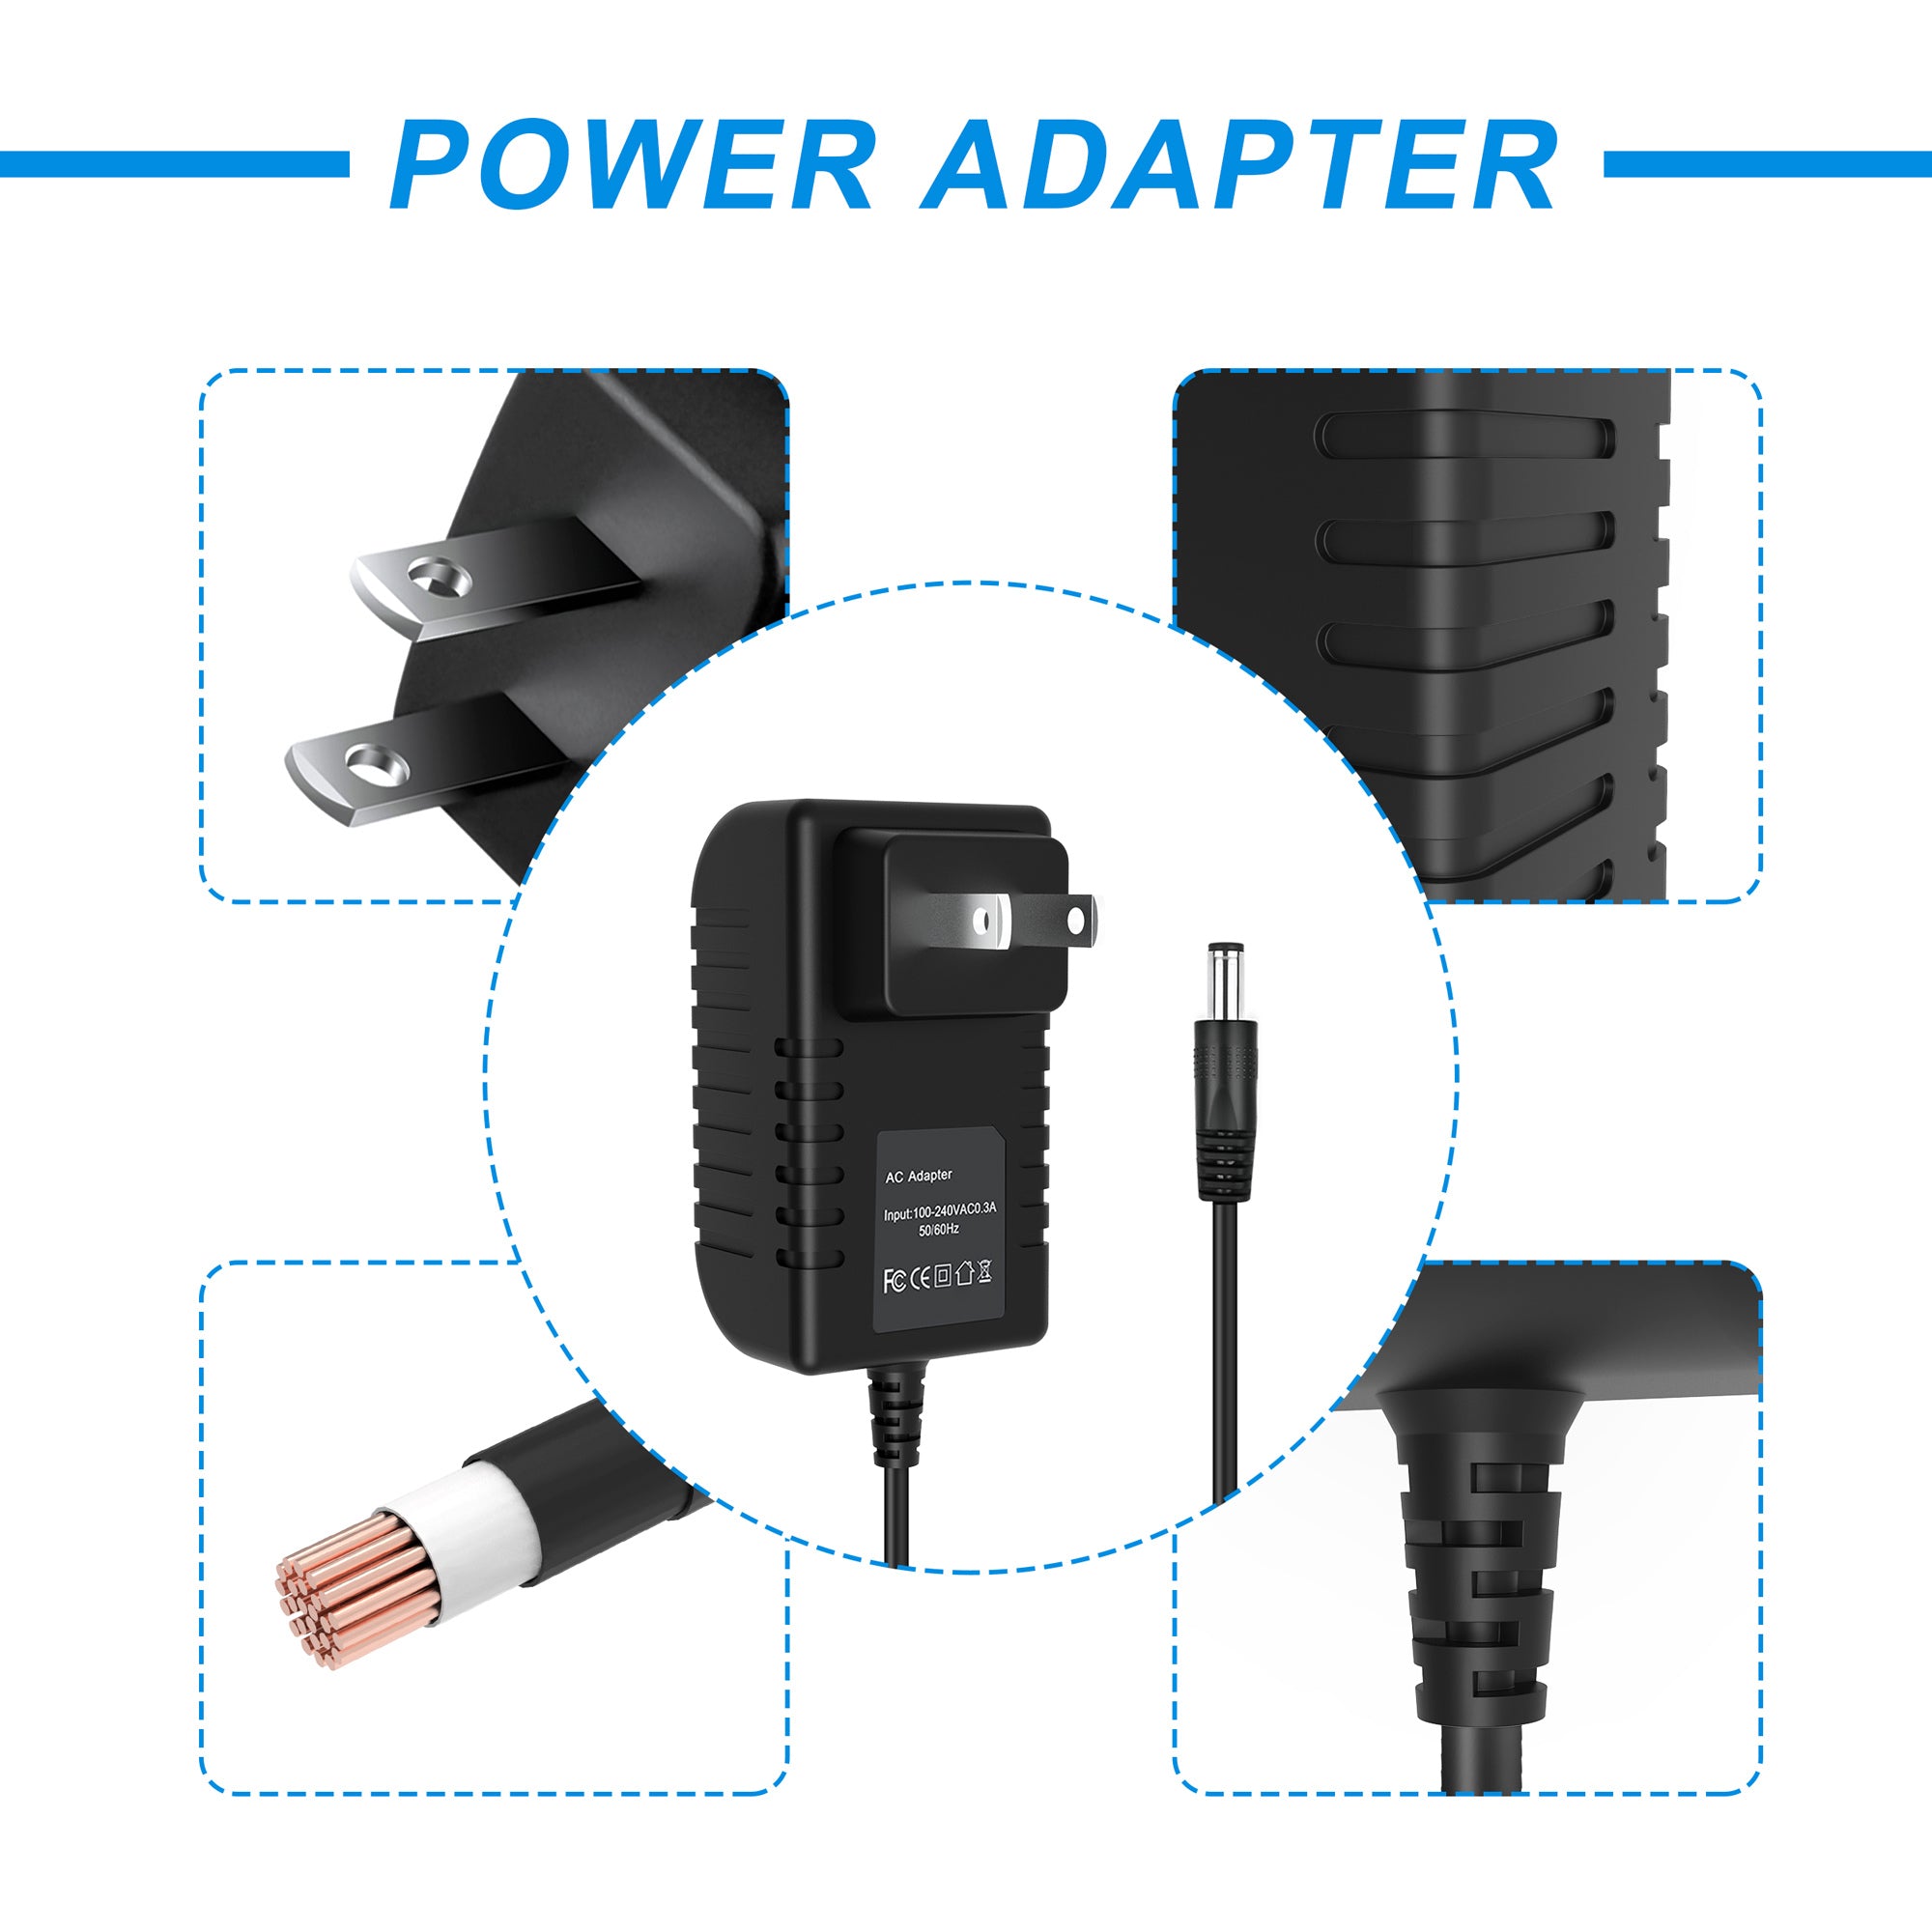 AbleGrid AC/DC Adapter Compatible with Maylong M-150 M150 Android Tablet PC Power Supply Cord Cable PS Wall Home Charger Input: 100 - 240 VAC Worldwide Use Mains PSU